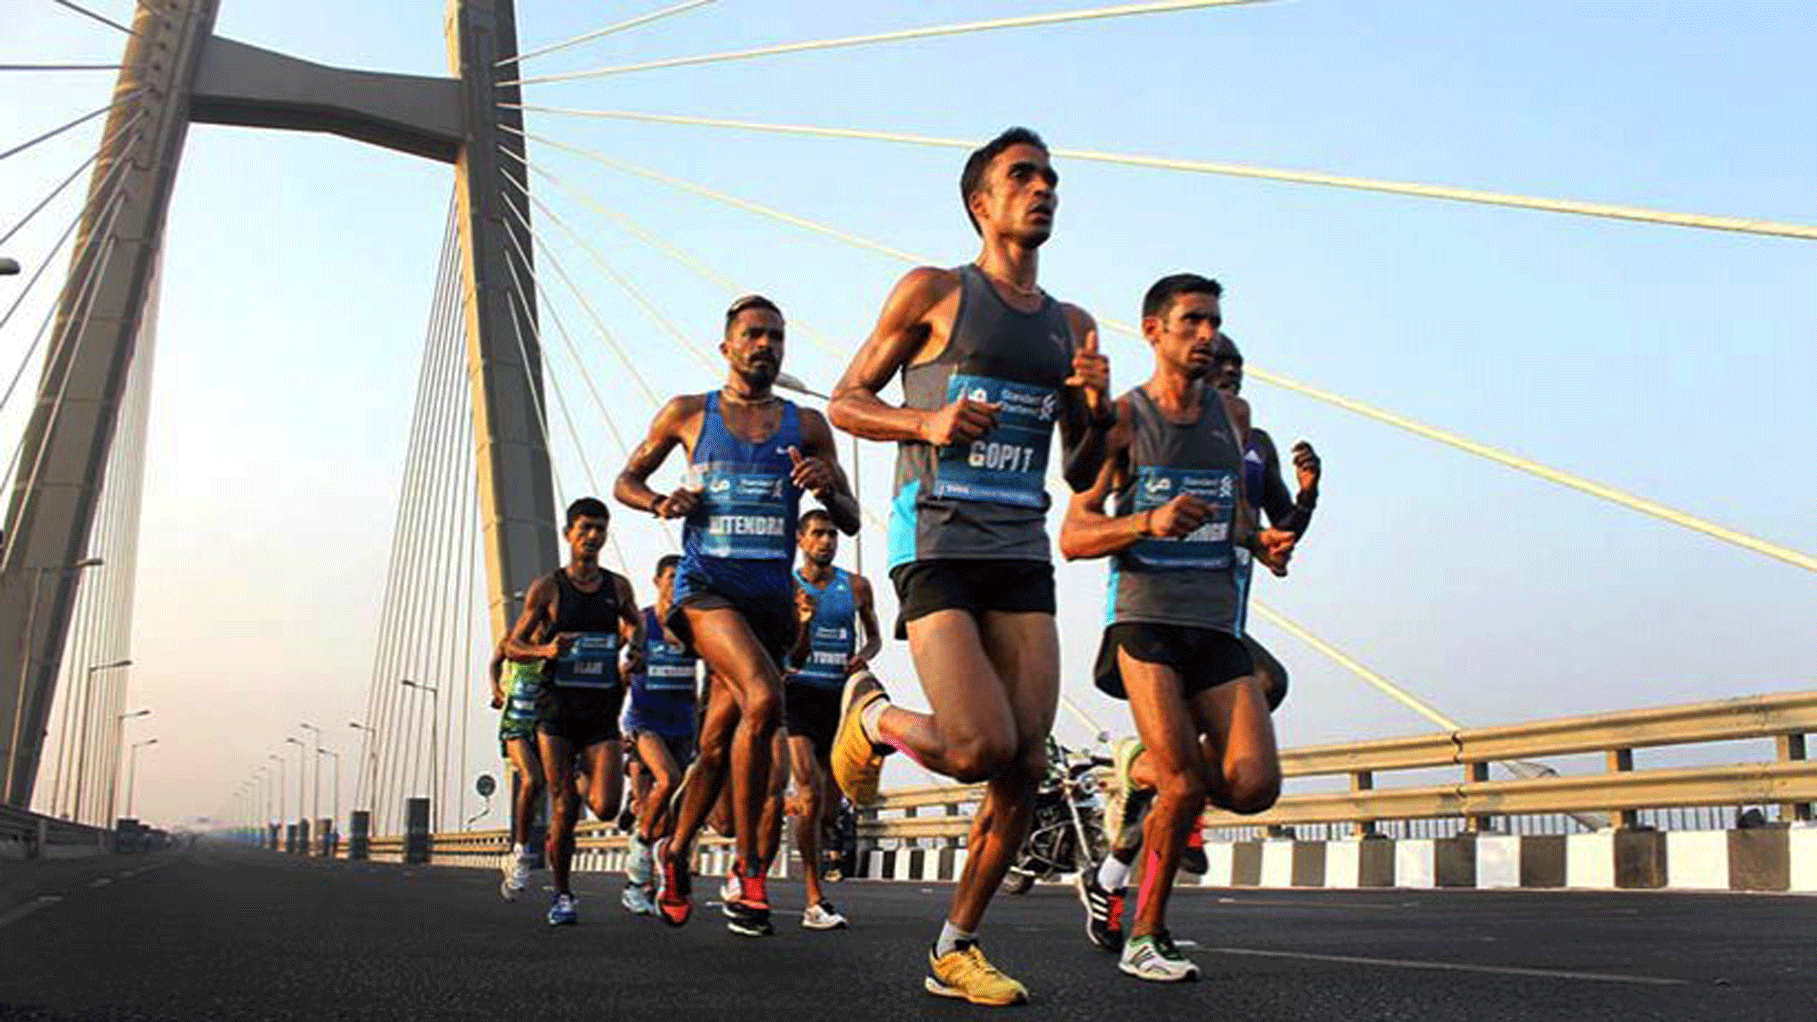 

It’s more than distance – running a marathon takes an extraordinary level of desire, determination and dedication. Scroll below to know what it means to overcome fear and go for the impossible for the 86 heart patients participating in the Mumbai Marathon (Picture from the 2016 Edition of the Mumbai Marathon: SCMM)